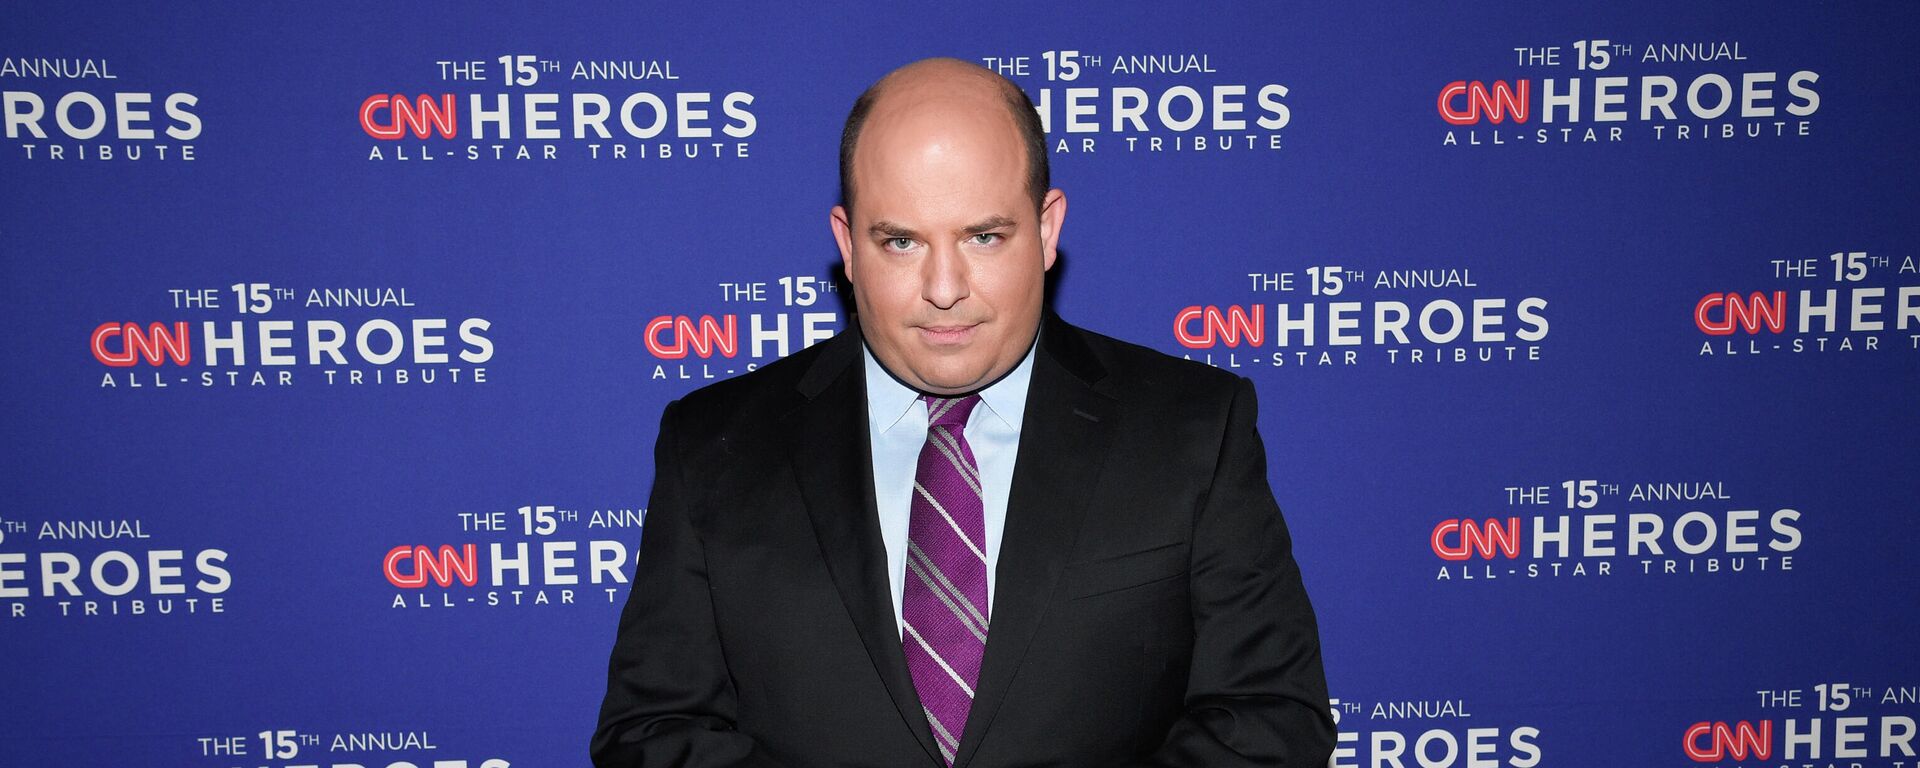 Brian Stelter attends the 15th annual CNN Heroes All-Star Tribute at the American Museum of Natural History on Sunday, Dec. 12, 2021, in New York. - Sputnik International, 1920, 03.02.2022